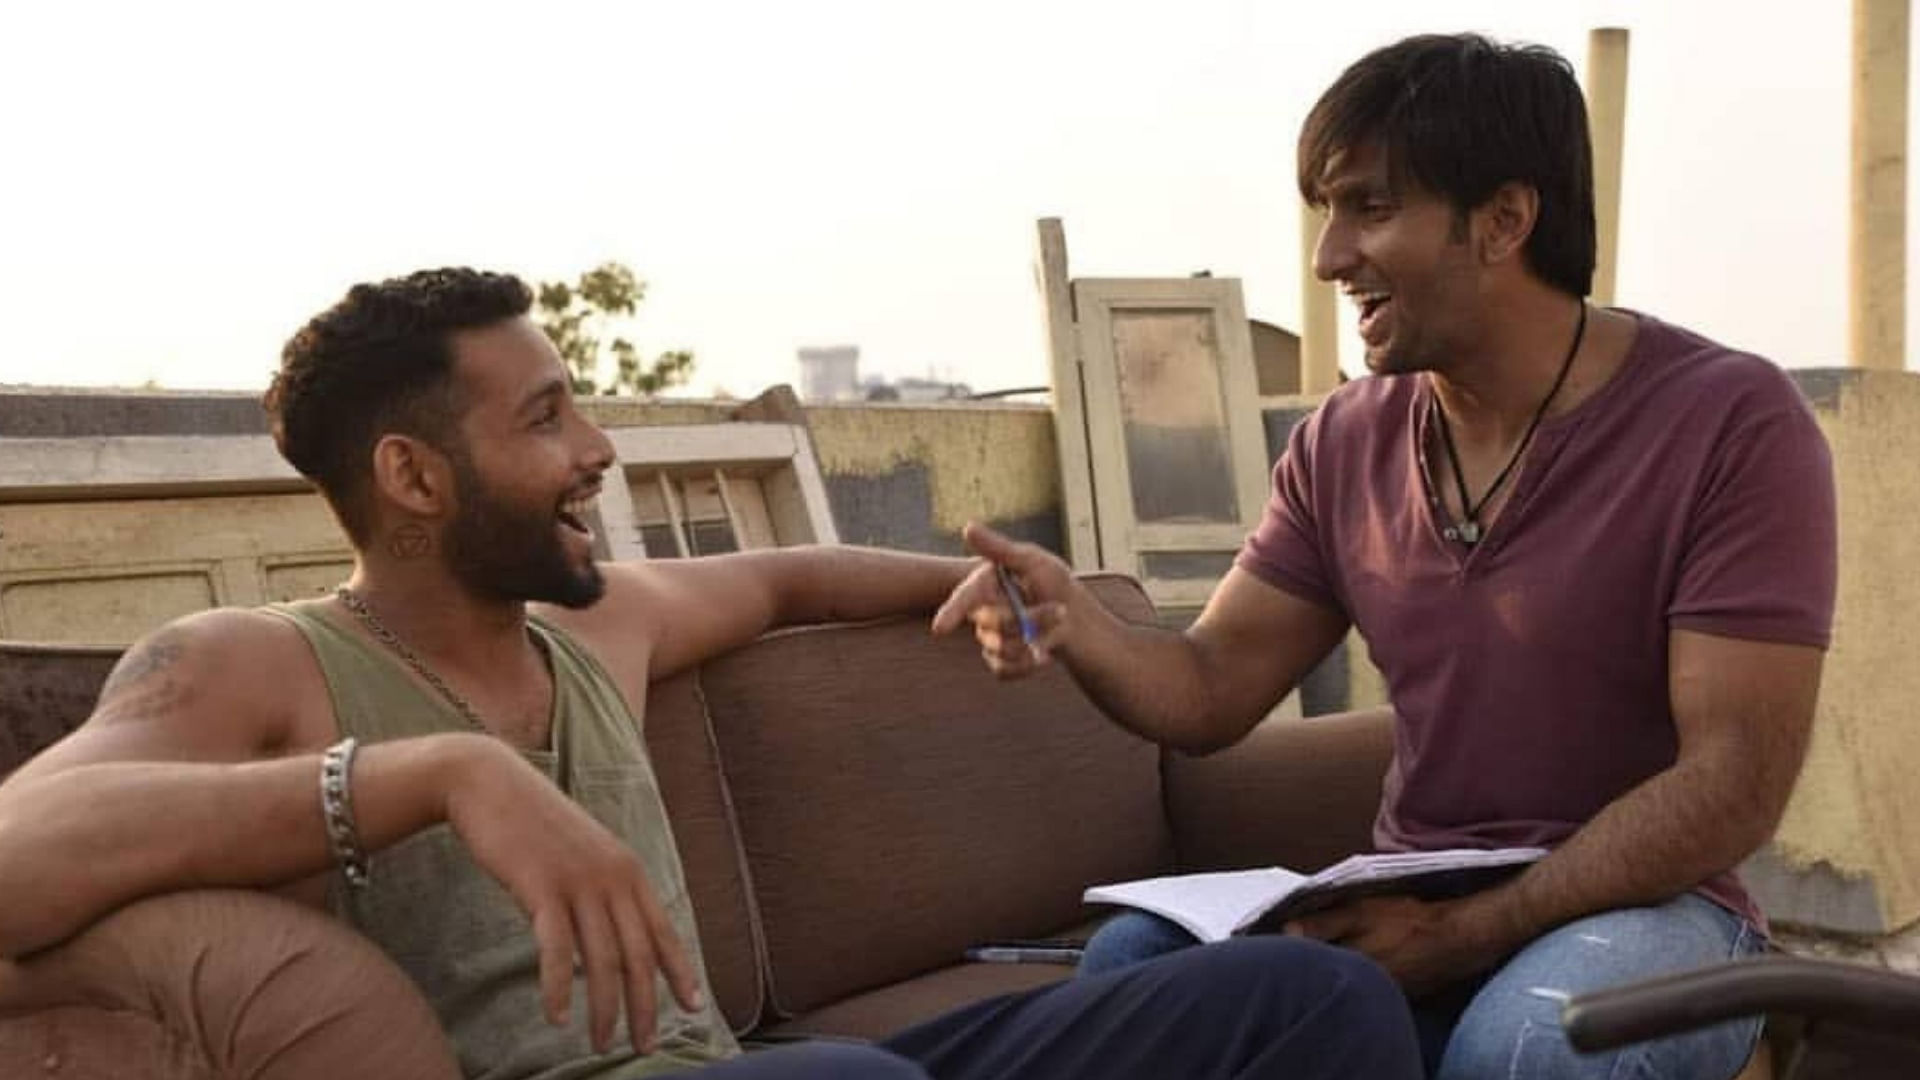 Siddhant Chaturvedi and Ranveer Singh play rappers in <i>Gully Boy</i>.